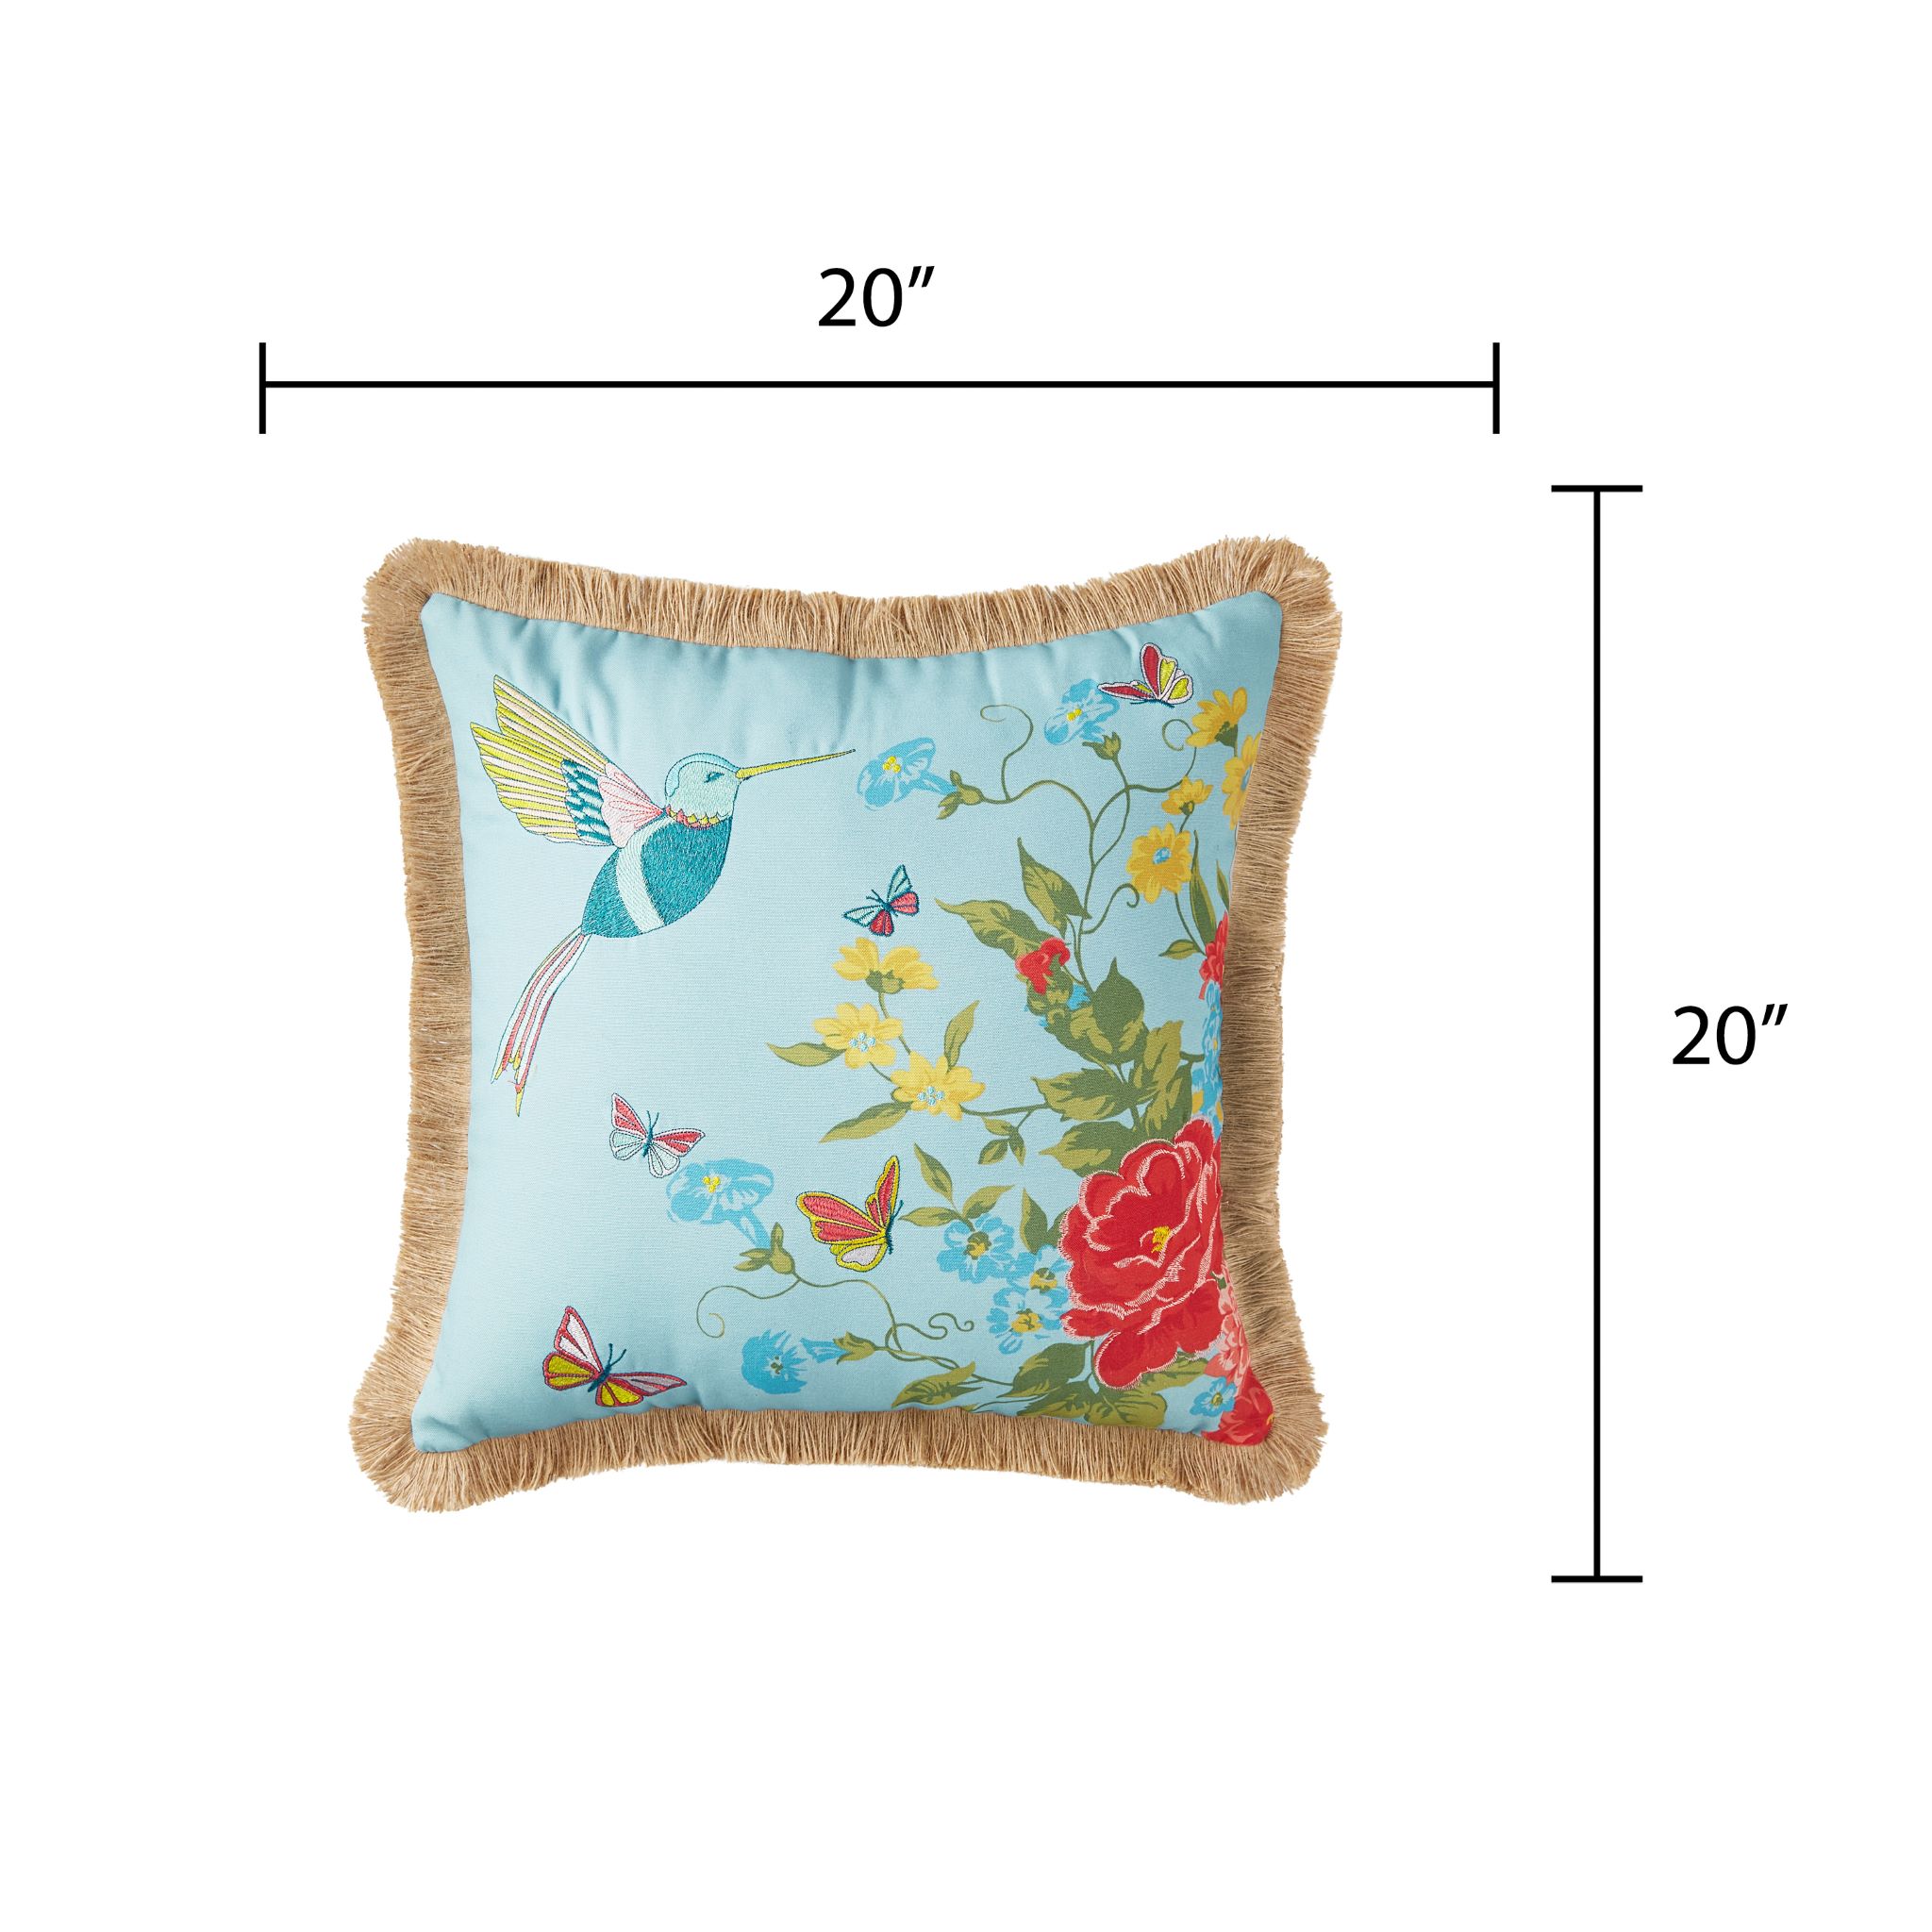 The Pioneer Woman Sweet Rose Embroidered Bird Outdoor Pillow, 20" x 20" - image 4 of 6